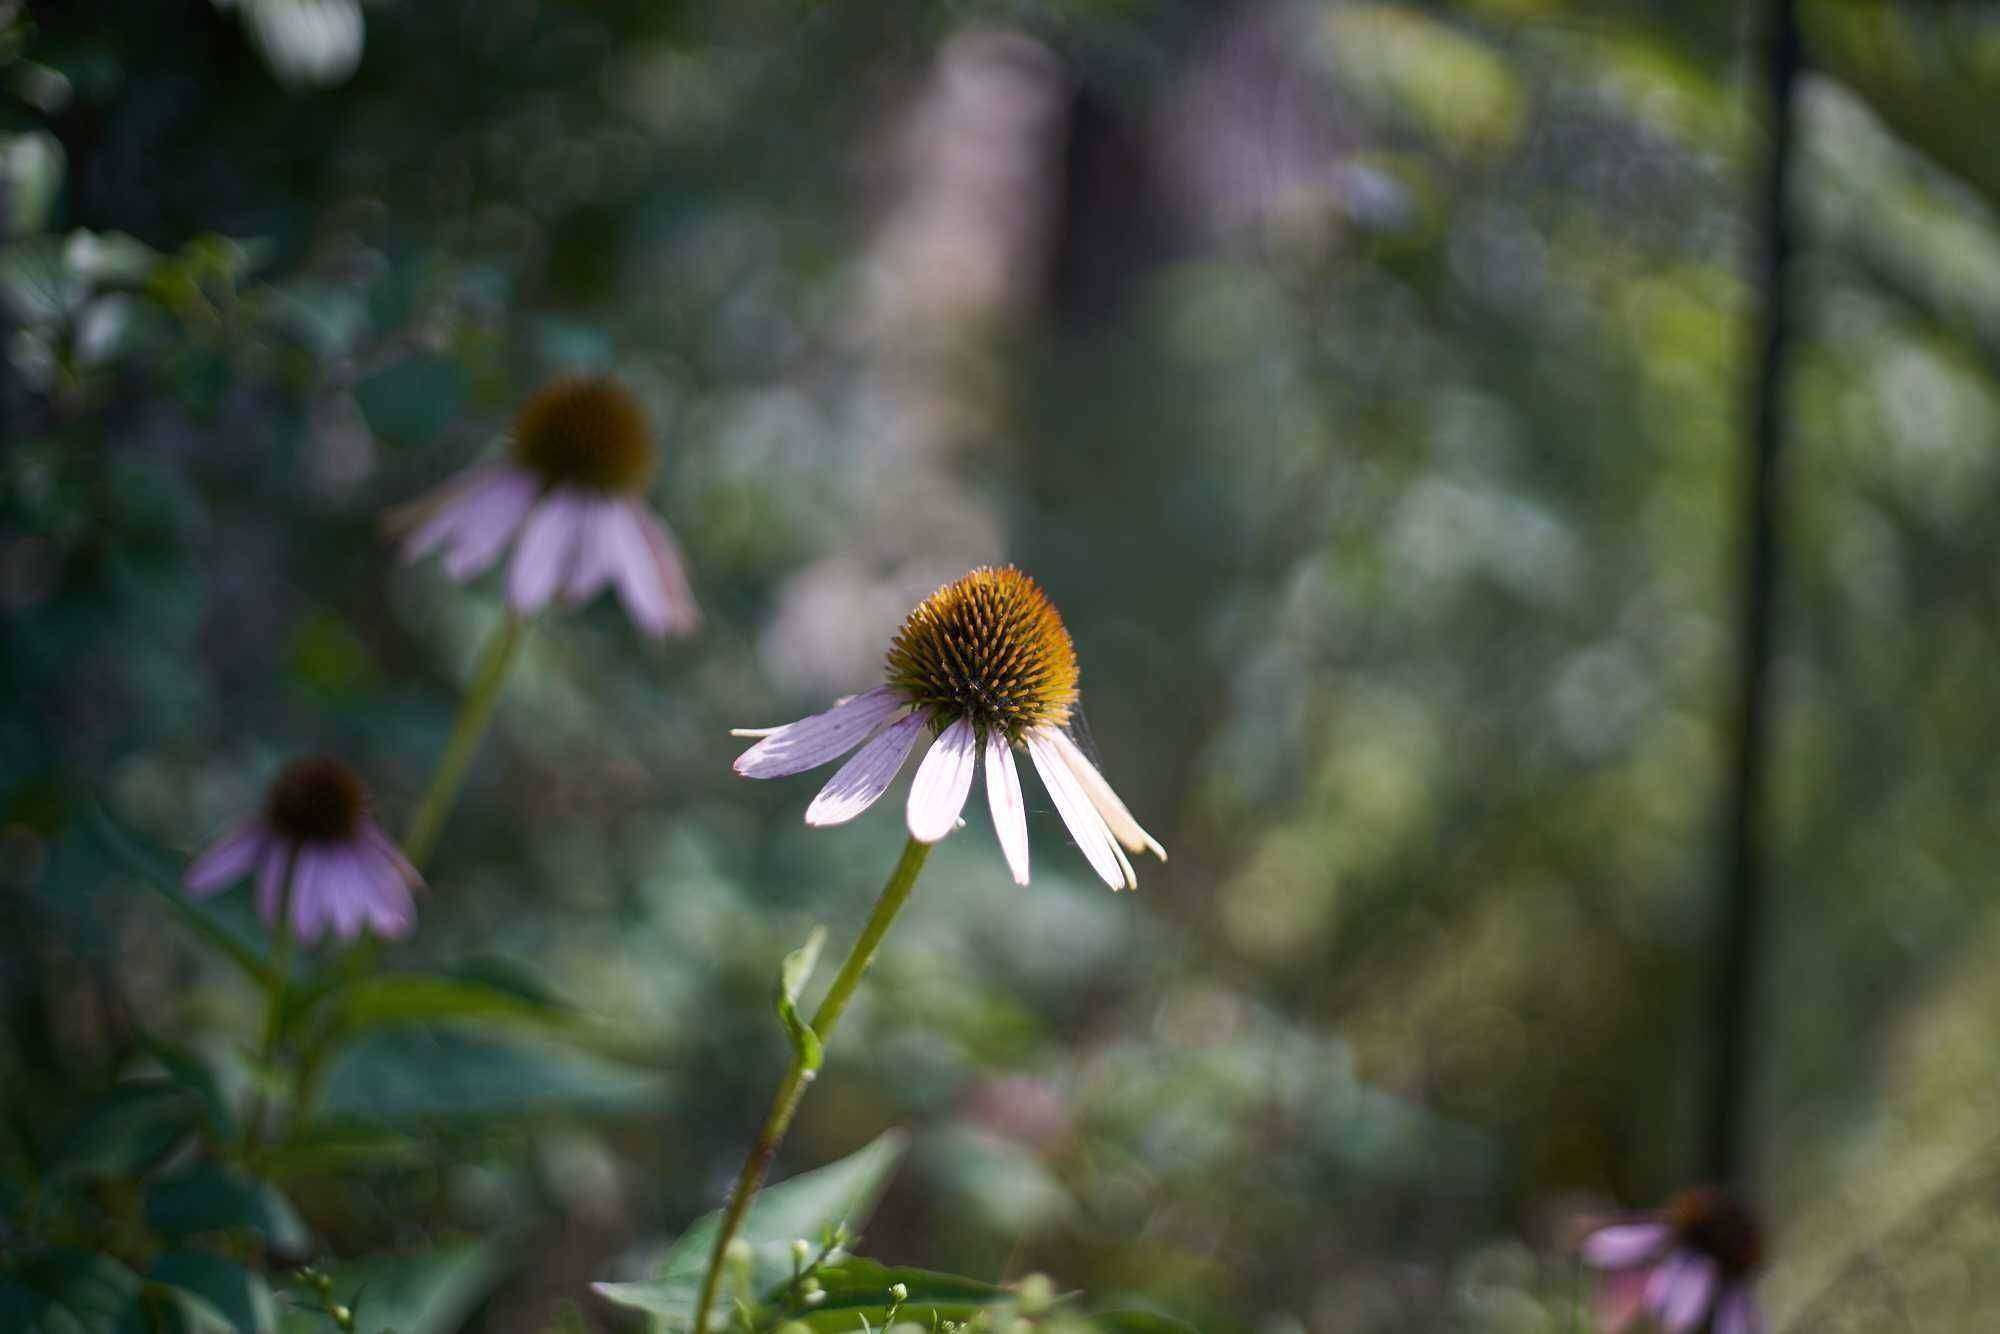 Sample image from Canon 50mm f/1.8 FD iii lens | ISO 100 | f/1.8